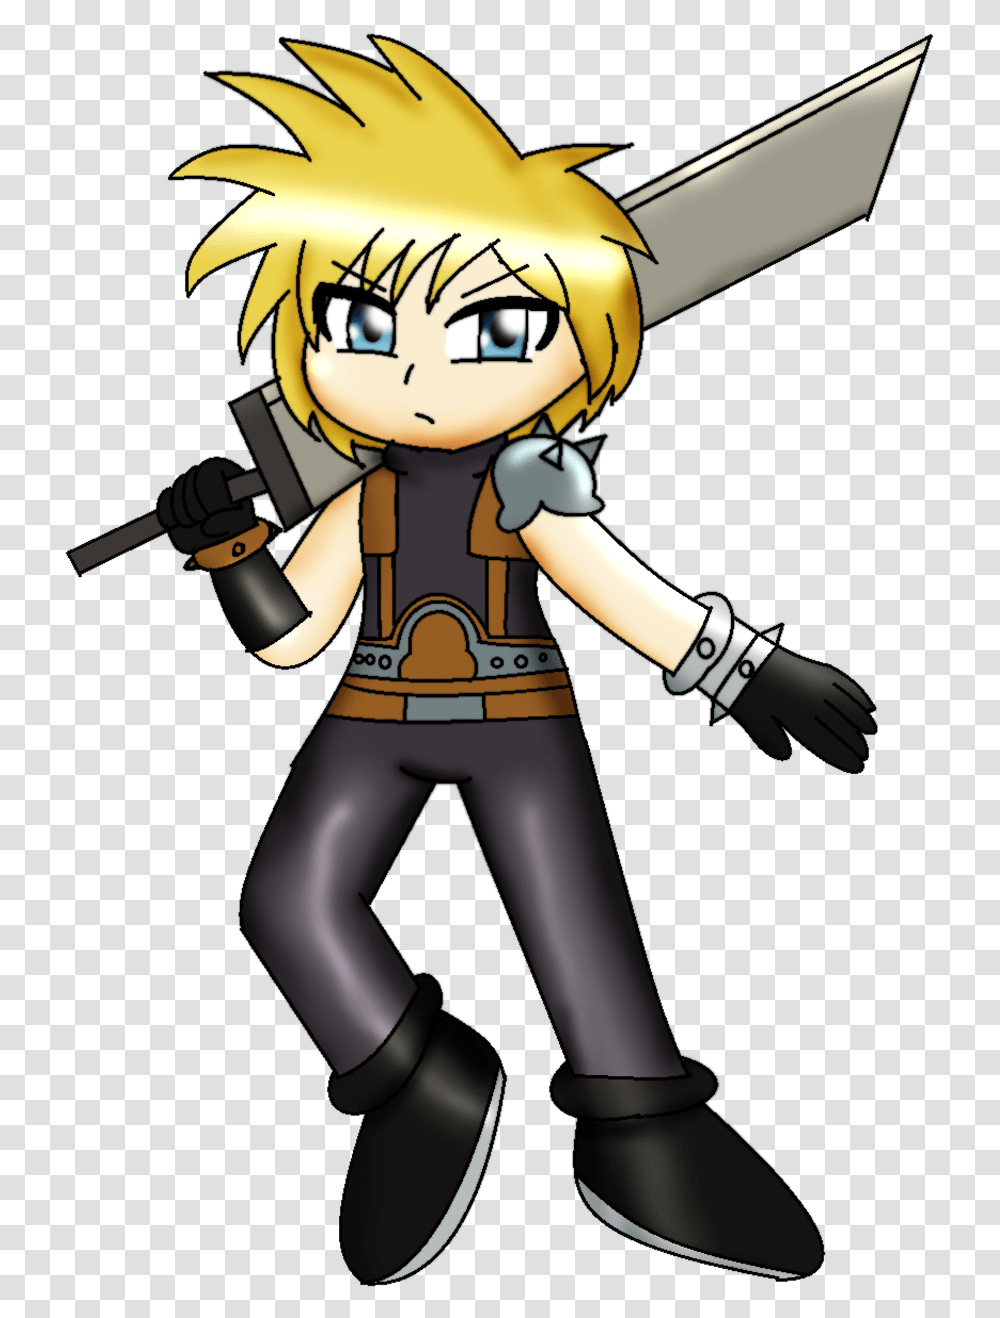 Cloud Strife By Skunk Girlkeko714 Fur Affinity Dot Net Fictional Character, Toy, Clothing, Apparel, Comics Transparent Png